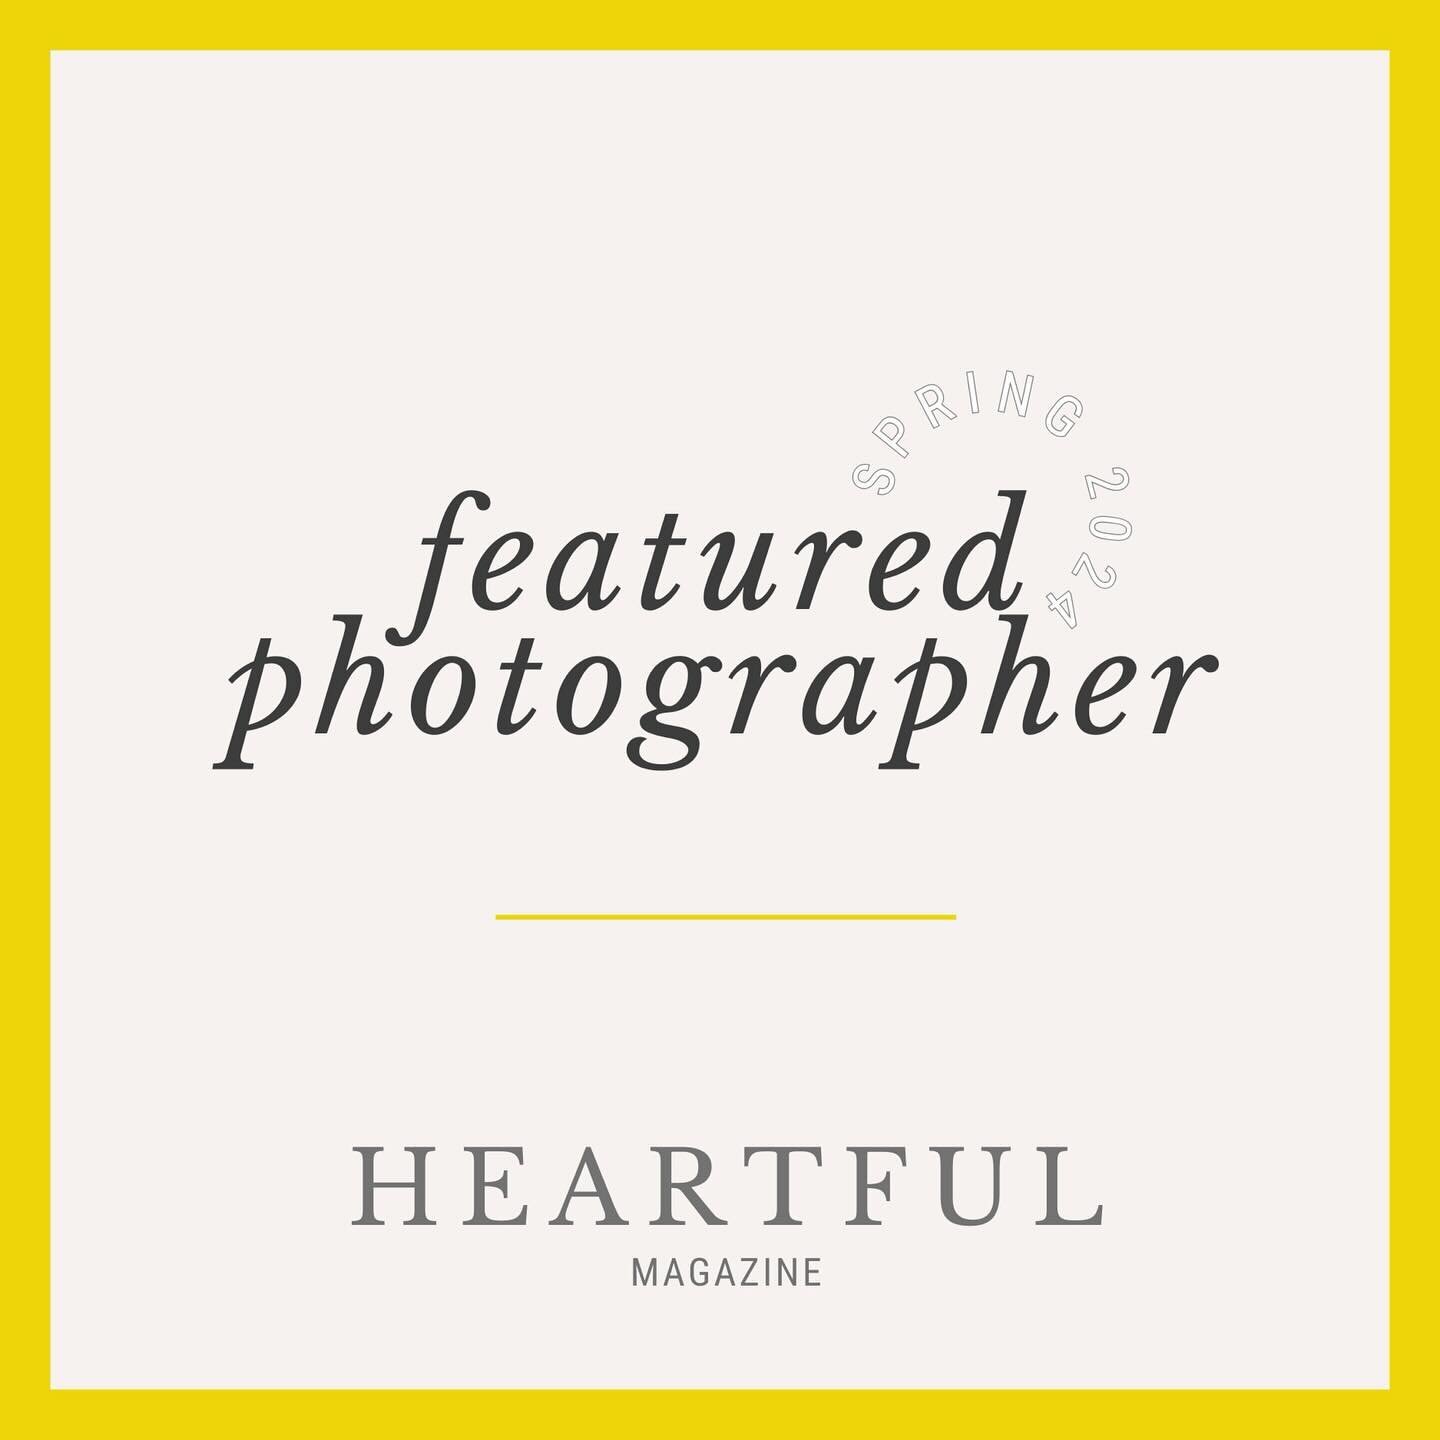 The spring issue of Heartful Magazine is out and my work is featured! @heartfulmagazine I&rsquo;m so excited! @brookebschultz does such a beautiful job pulling together these sets of absolutely inspiring photos from photographers I admire so much, so